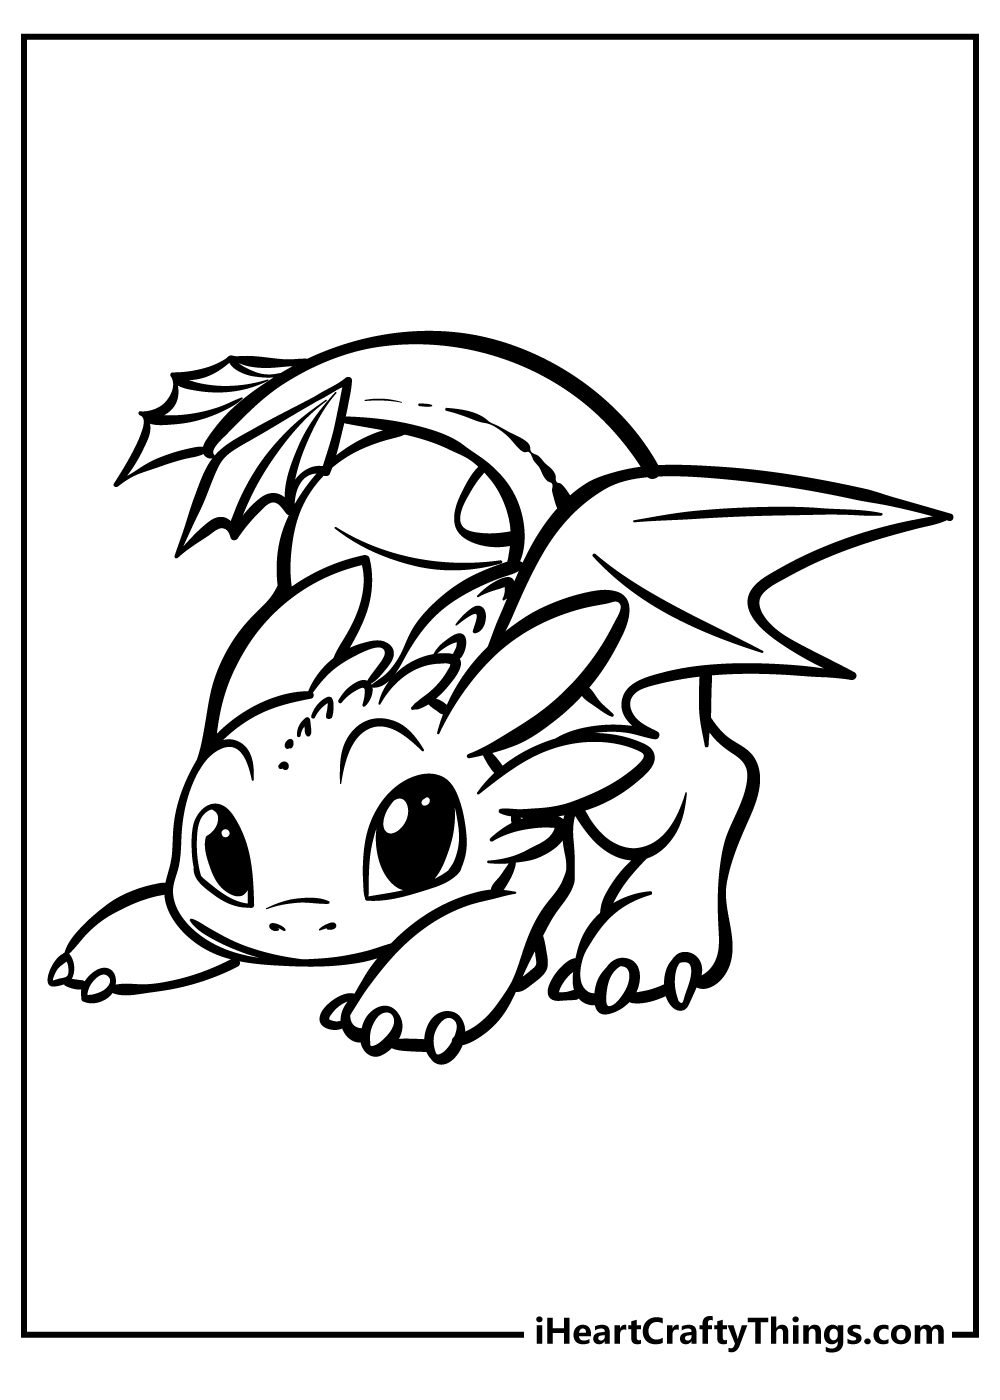 How to train your dragon coloring pages updated